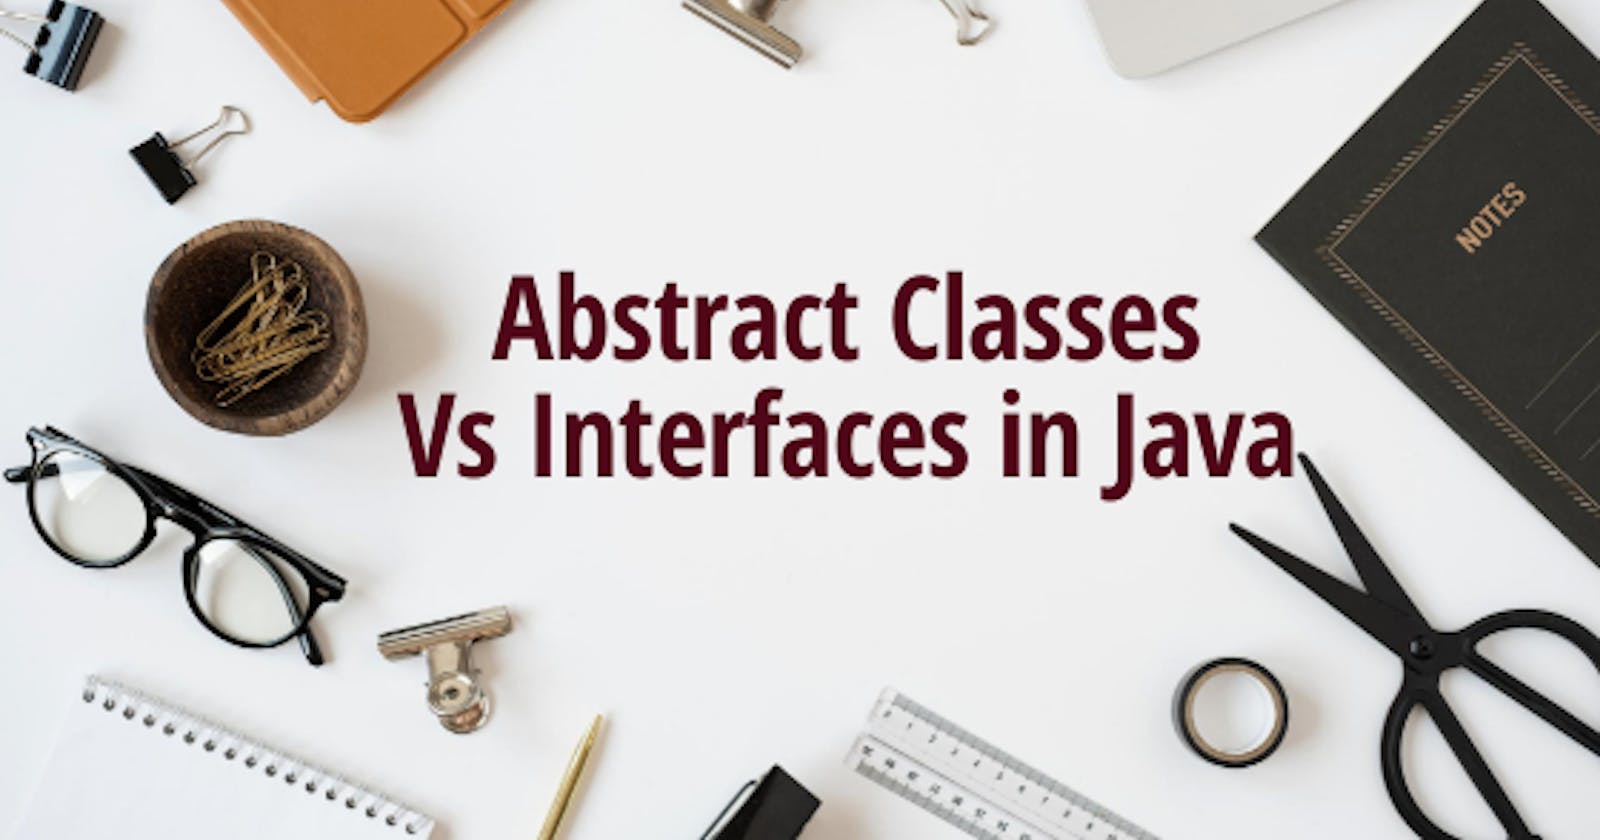 Abstract Classes Vs Interfaces in Java: When to use What?